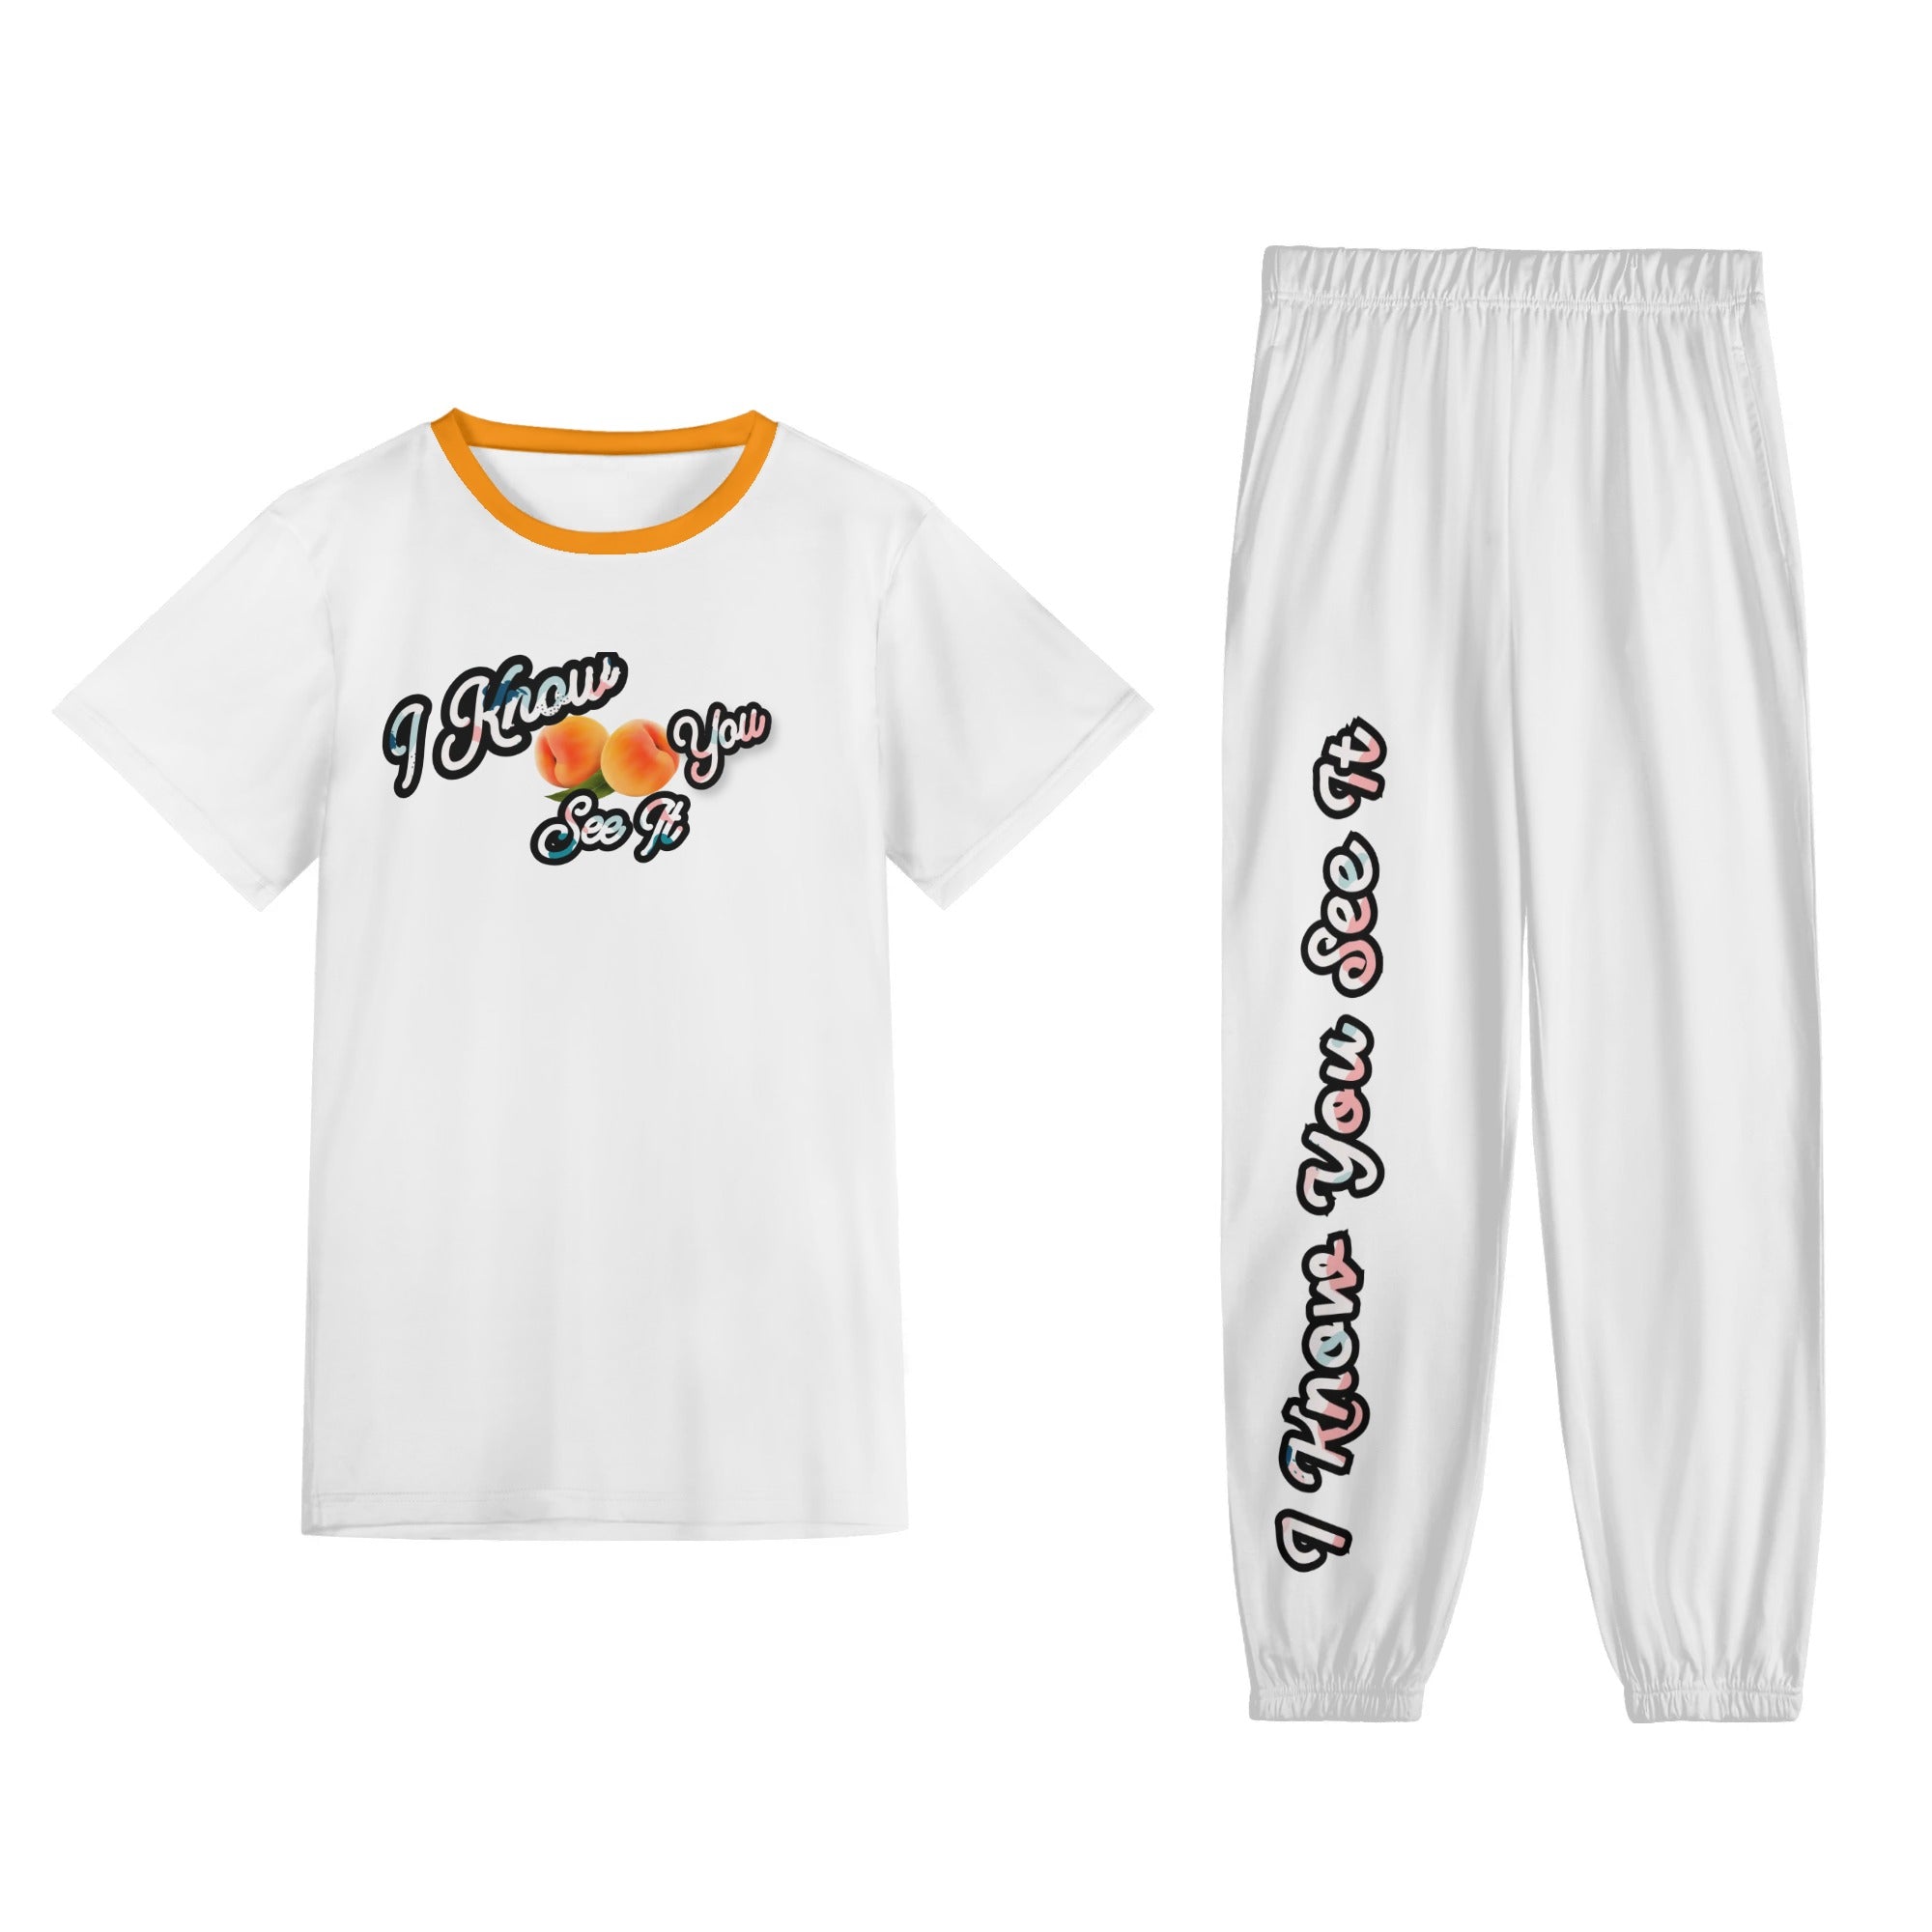 White - I Know You See It- Womens Short Sleeve Sports Outfit Set 2 - Womens Pants Sets at TFC&H Co.